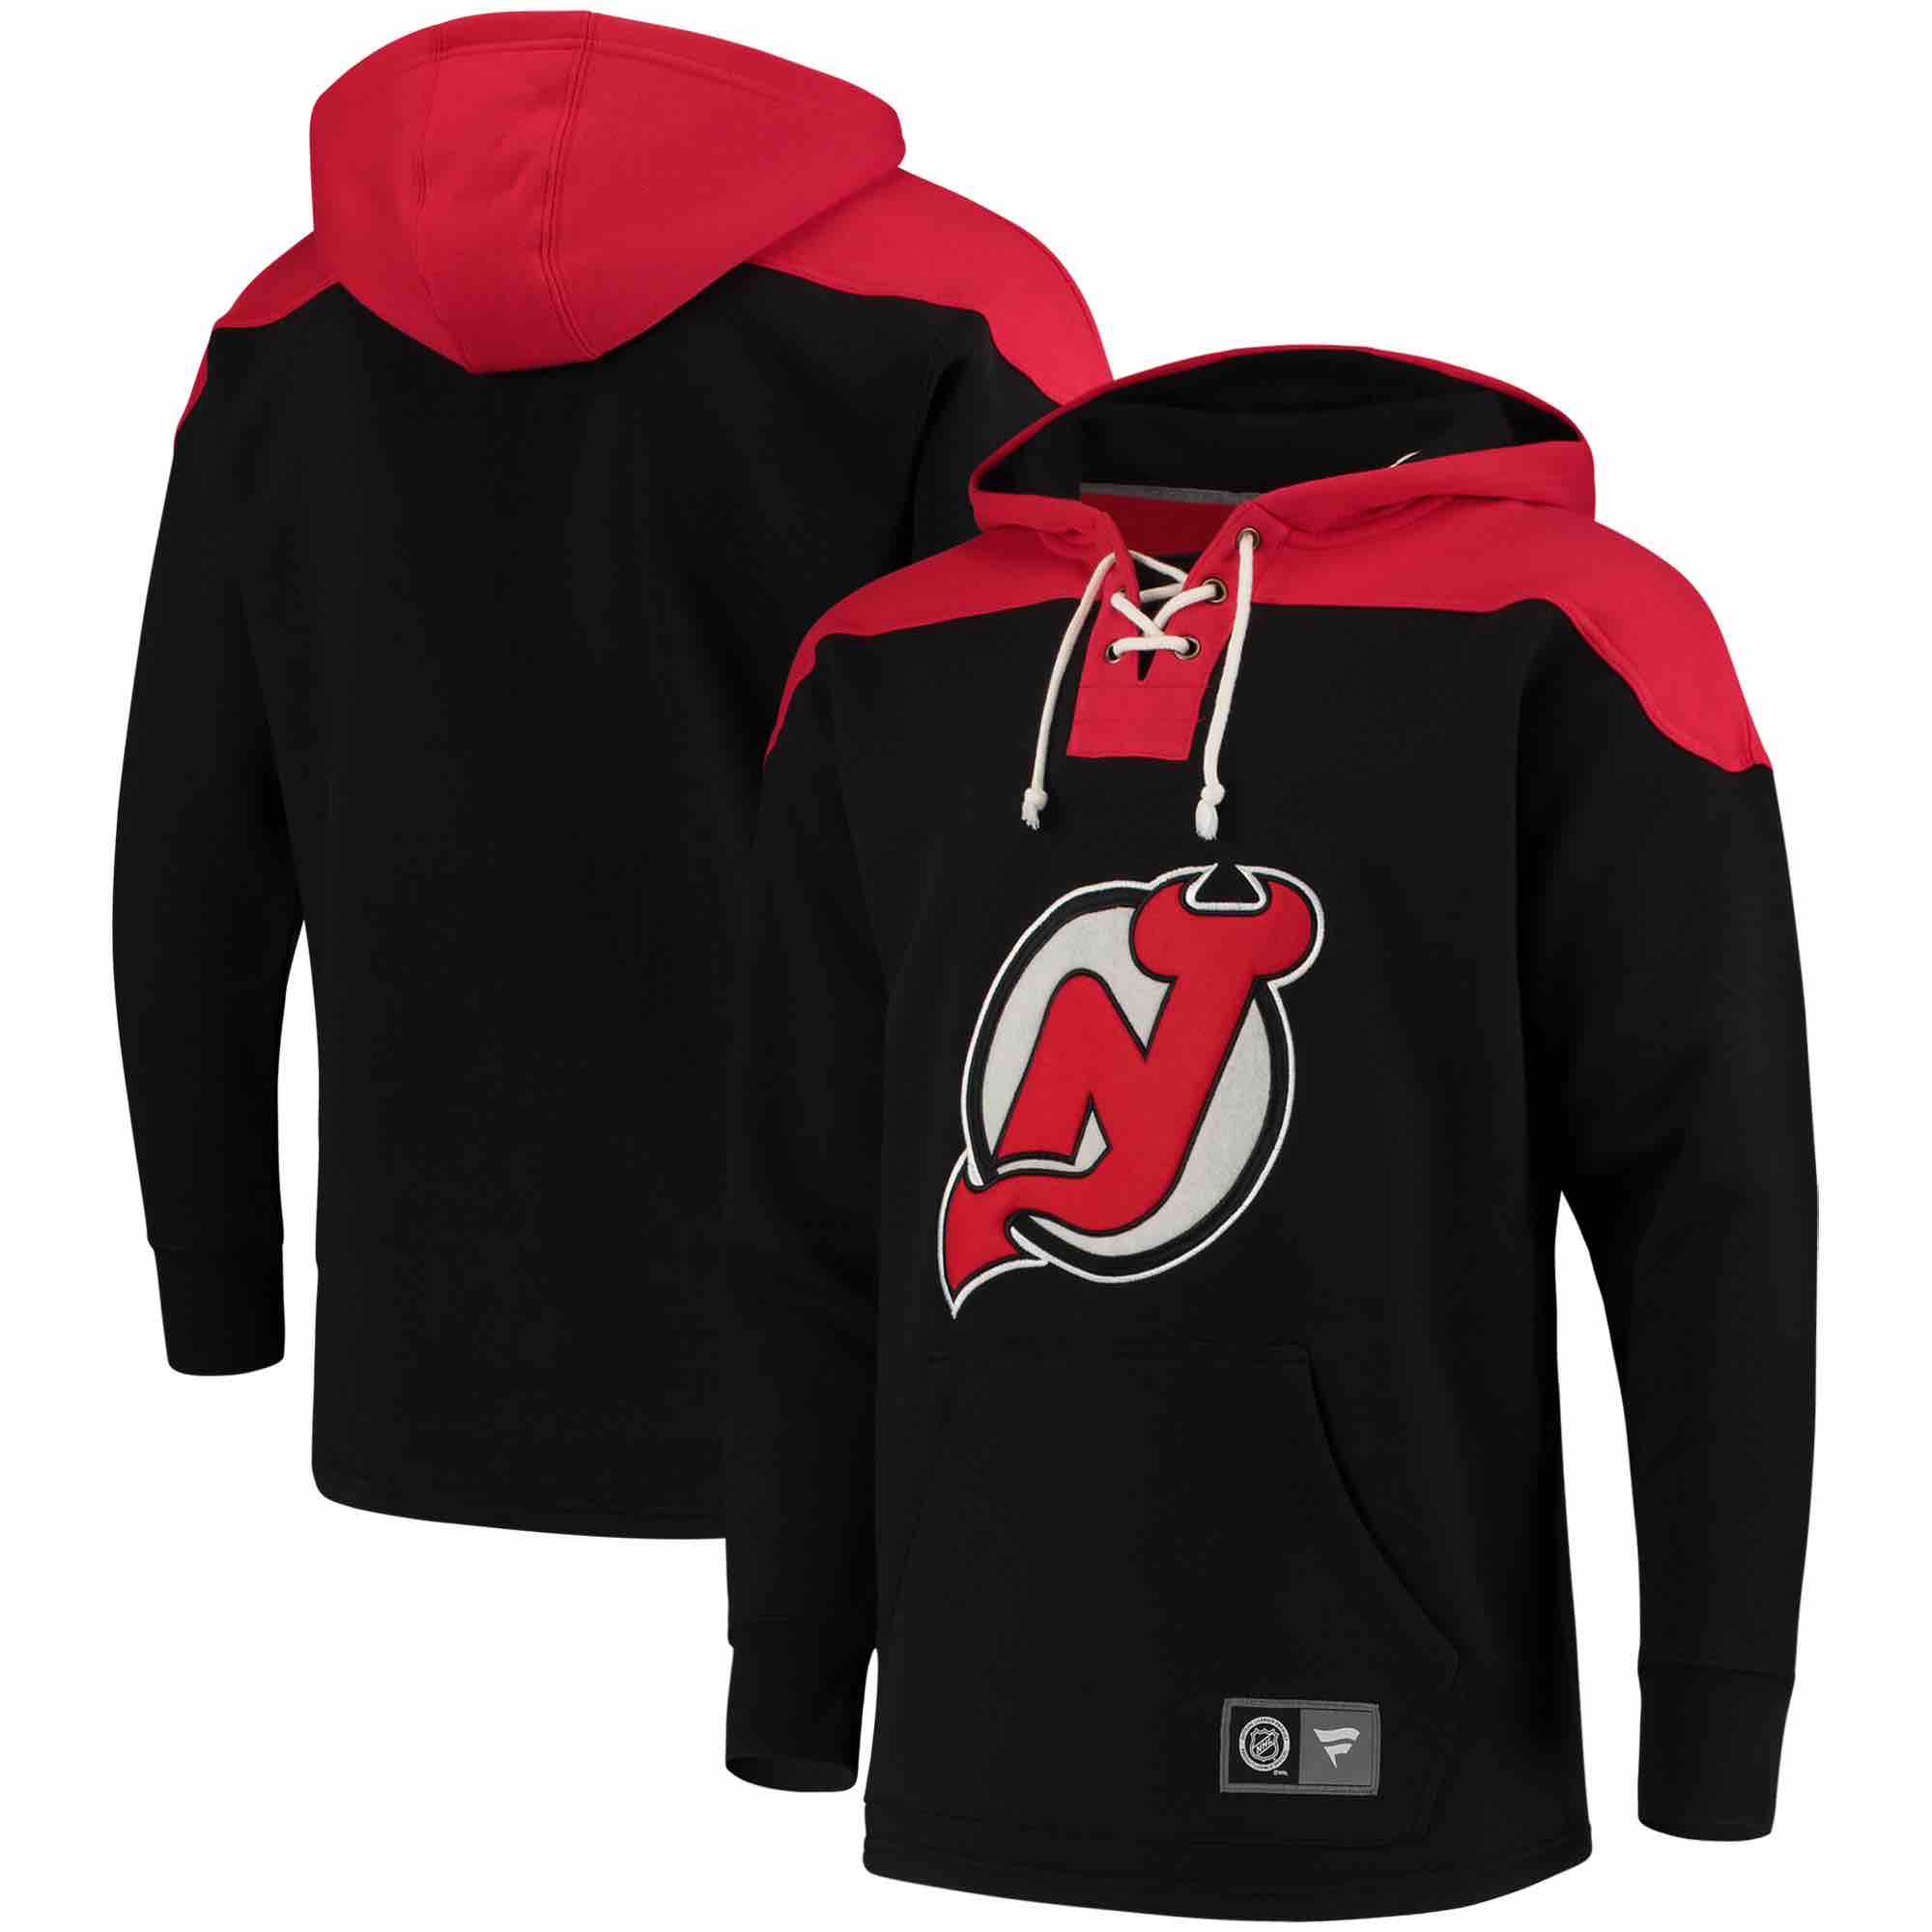 NHL New Jersey Devils Black Personalized Hoodie